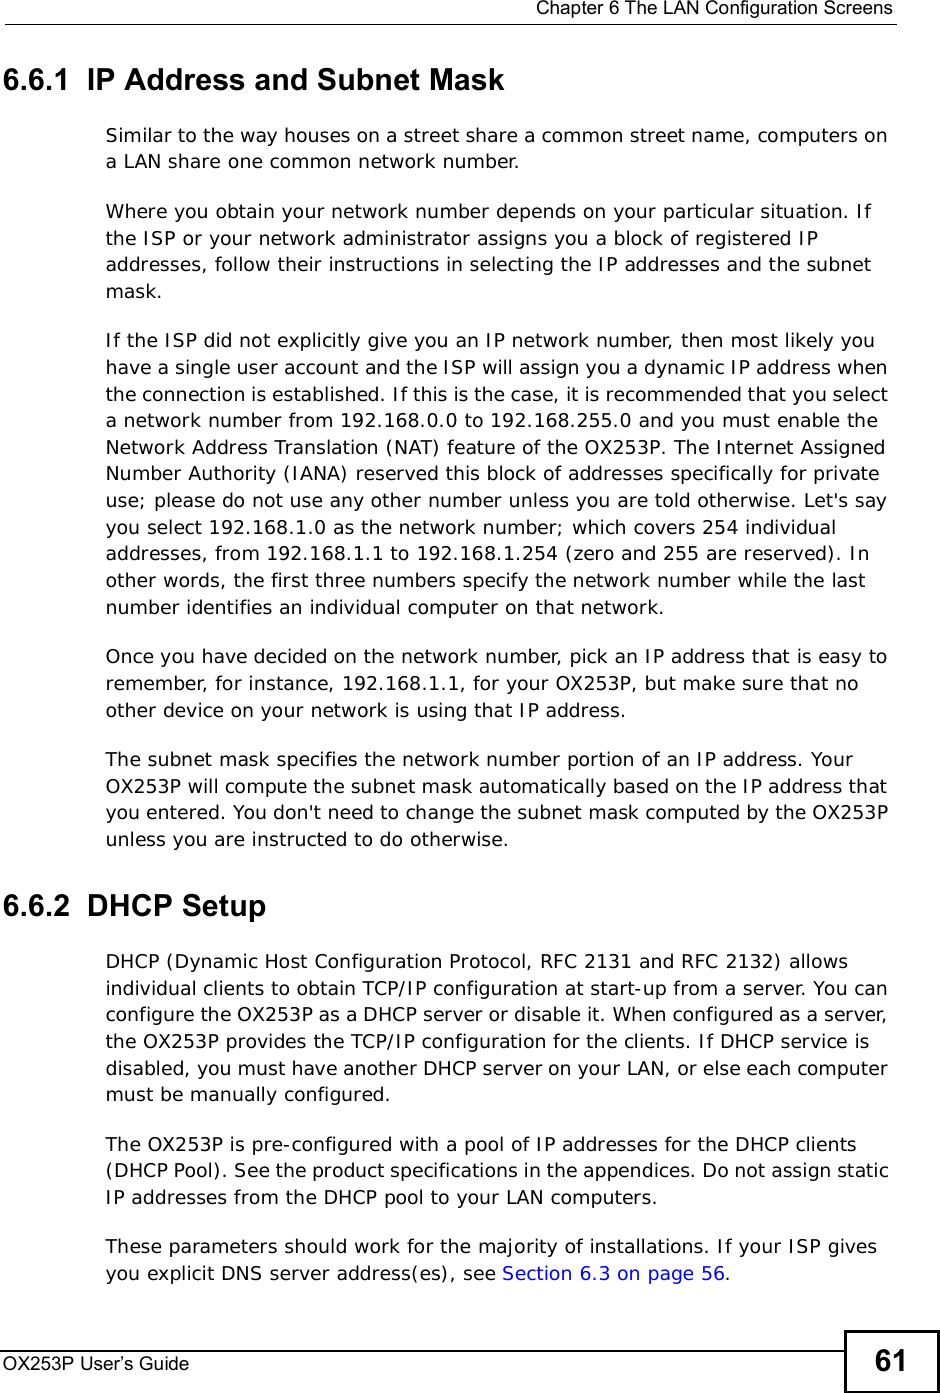  Chapter 6The LAN Configuration ScreensOX253P User’s Guide 616.6.1  IP Address and Subnet MaskSimilar to the way houses on a street share a common street name, computers on a LAN share one common network number.Where you obtain your network number depends on your particular situation. If the ISP or your network administrator assigns you a block of registered IP addresses, follow their instructions in selecting the IP addresses and the subnet mask.If the ISP did not explicitly give you an IP network number, then most likely you have a single user account and the ISP will assign you a dynamic IP address when the connection is established. If this is the case, it is recommended that you select a network number from 192.168.0.0 to 192.168.255.0 and you must enable the Network Address Translation (NAT) feature of the OX253P. The Internet Assigned Number Authority (IANA) reserved this block of addresses specifically for private use; please do not use any other number unless you are told otherwise. Let&apos;s say you select 192.168.1.0 as the network number; which covers 254 individual addresses, from 192.168.1.1 to 192.168.1.254 (zero and 255 are reserved). In other words, the first three numbers specify the network number while the last number identifies an individual computer on that network.Once you have decided on the network number, pick an IP address that is easy to remember, for instance, 192.168.1.1, for your OX253P, but make sure that no other device on your network is using that IP address.The subnet mask specifies the network number portion of an IP address. Your OX253P will compute the subnet mask automatically based on the IP address that you entered. You don&apos;t need to change the subnet mask computed by the OX253P unless you are instructed to do otherwise.6.6.2  DHCP SetupDHCP (Dynamic Host Configuration Protocol, RFC 2131 and RFC 2132) allows individual clients to obtain TCP/IP configuration at start-up from a server. You can configure the OX253P as a DHCP server or disable it. When configured as a server, the OX253P provides the TCP/IP configuration for the clients. If DHCP service is disabled, you must have another DHCP server on your LAN, or else each computer must be manually configured.The OX253P is pre-configured with a pool of IP addresses for the DHCP clients (DHCP Pool). See the product specifications in the appendices. Do not assign static IP addresses from the DHCP pool to your LAN computers.These parameters should work for the majority of installations. If your ISP gives you explicit DNS server address(es), see Section 6.3 on page 56.